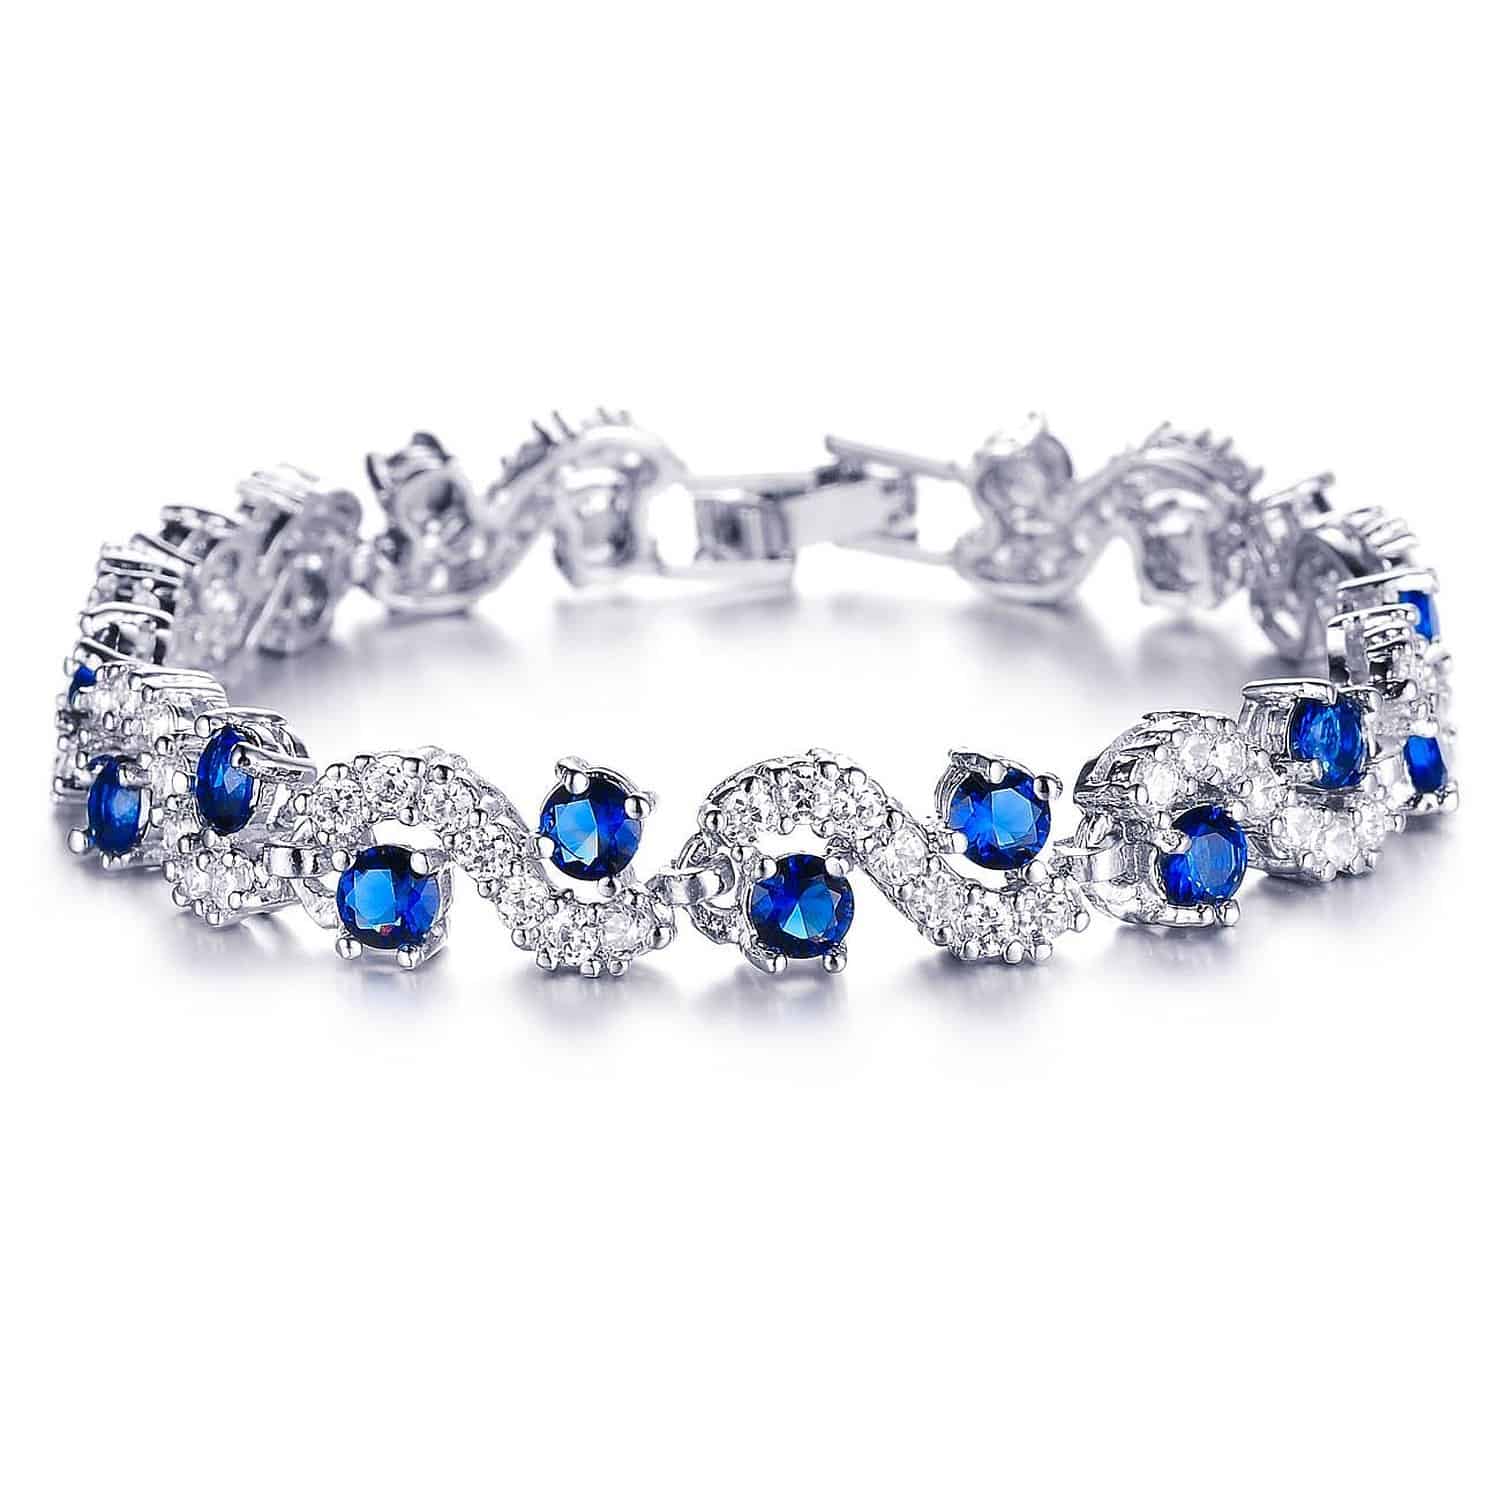 Rich Royal Blue Crystal High Grade Cz Chain bangle and bracelet for girls and Women by Yellow Chimes